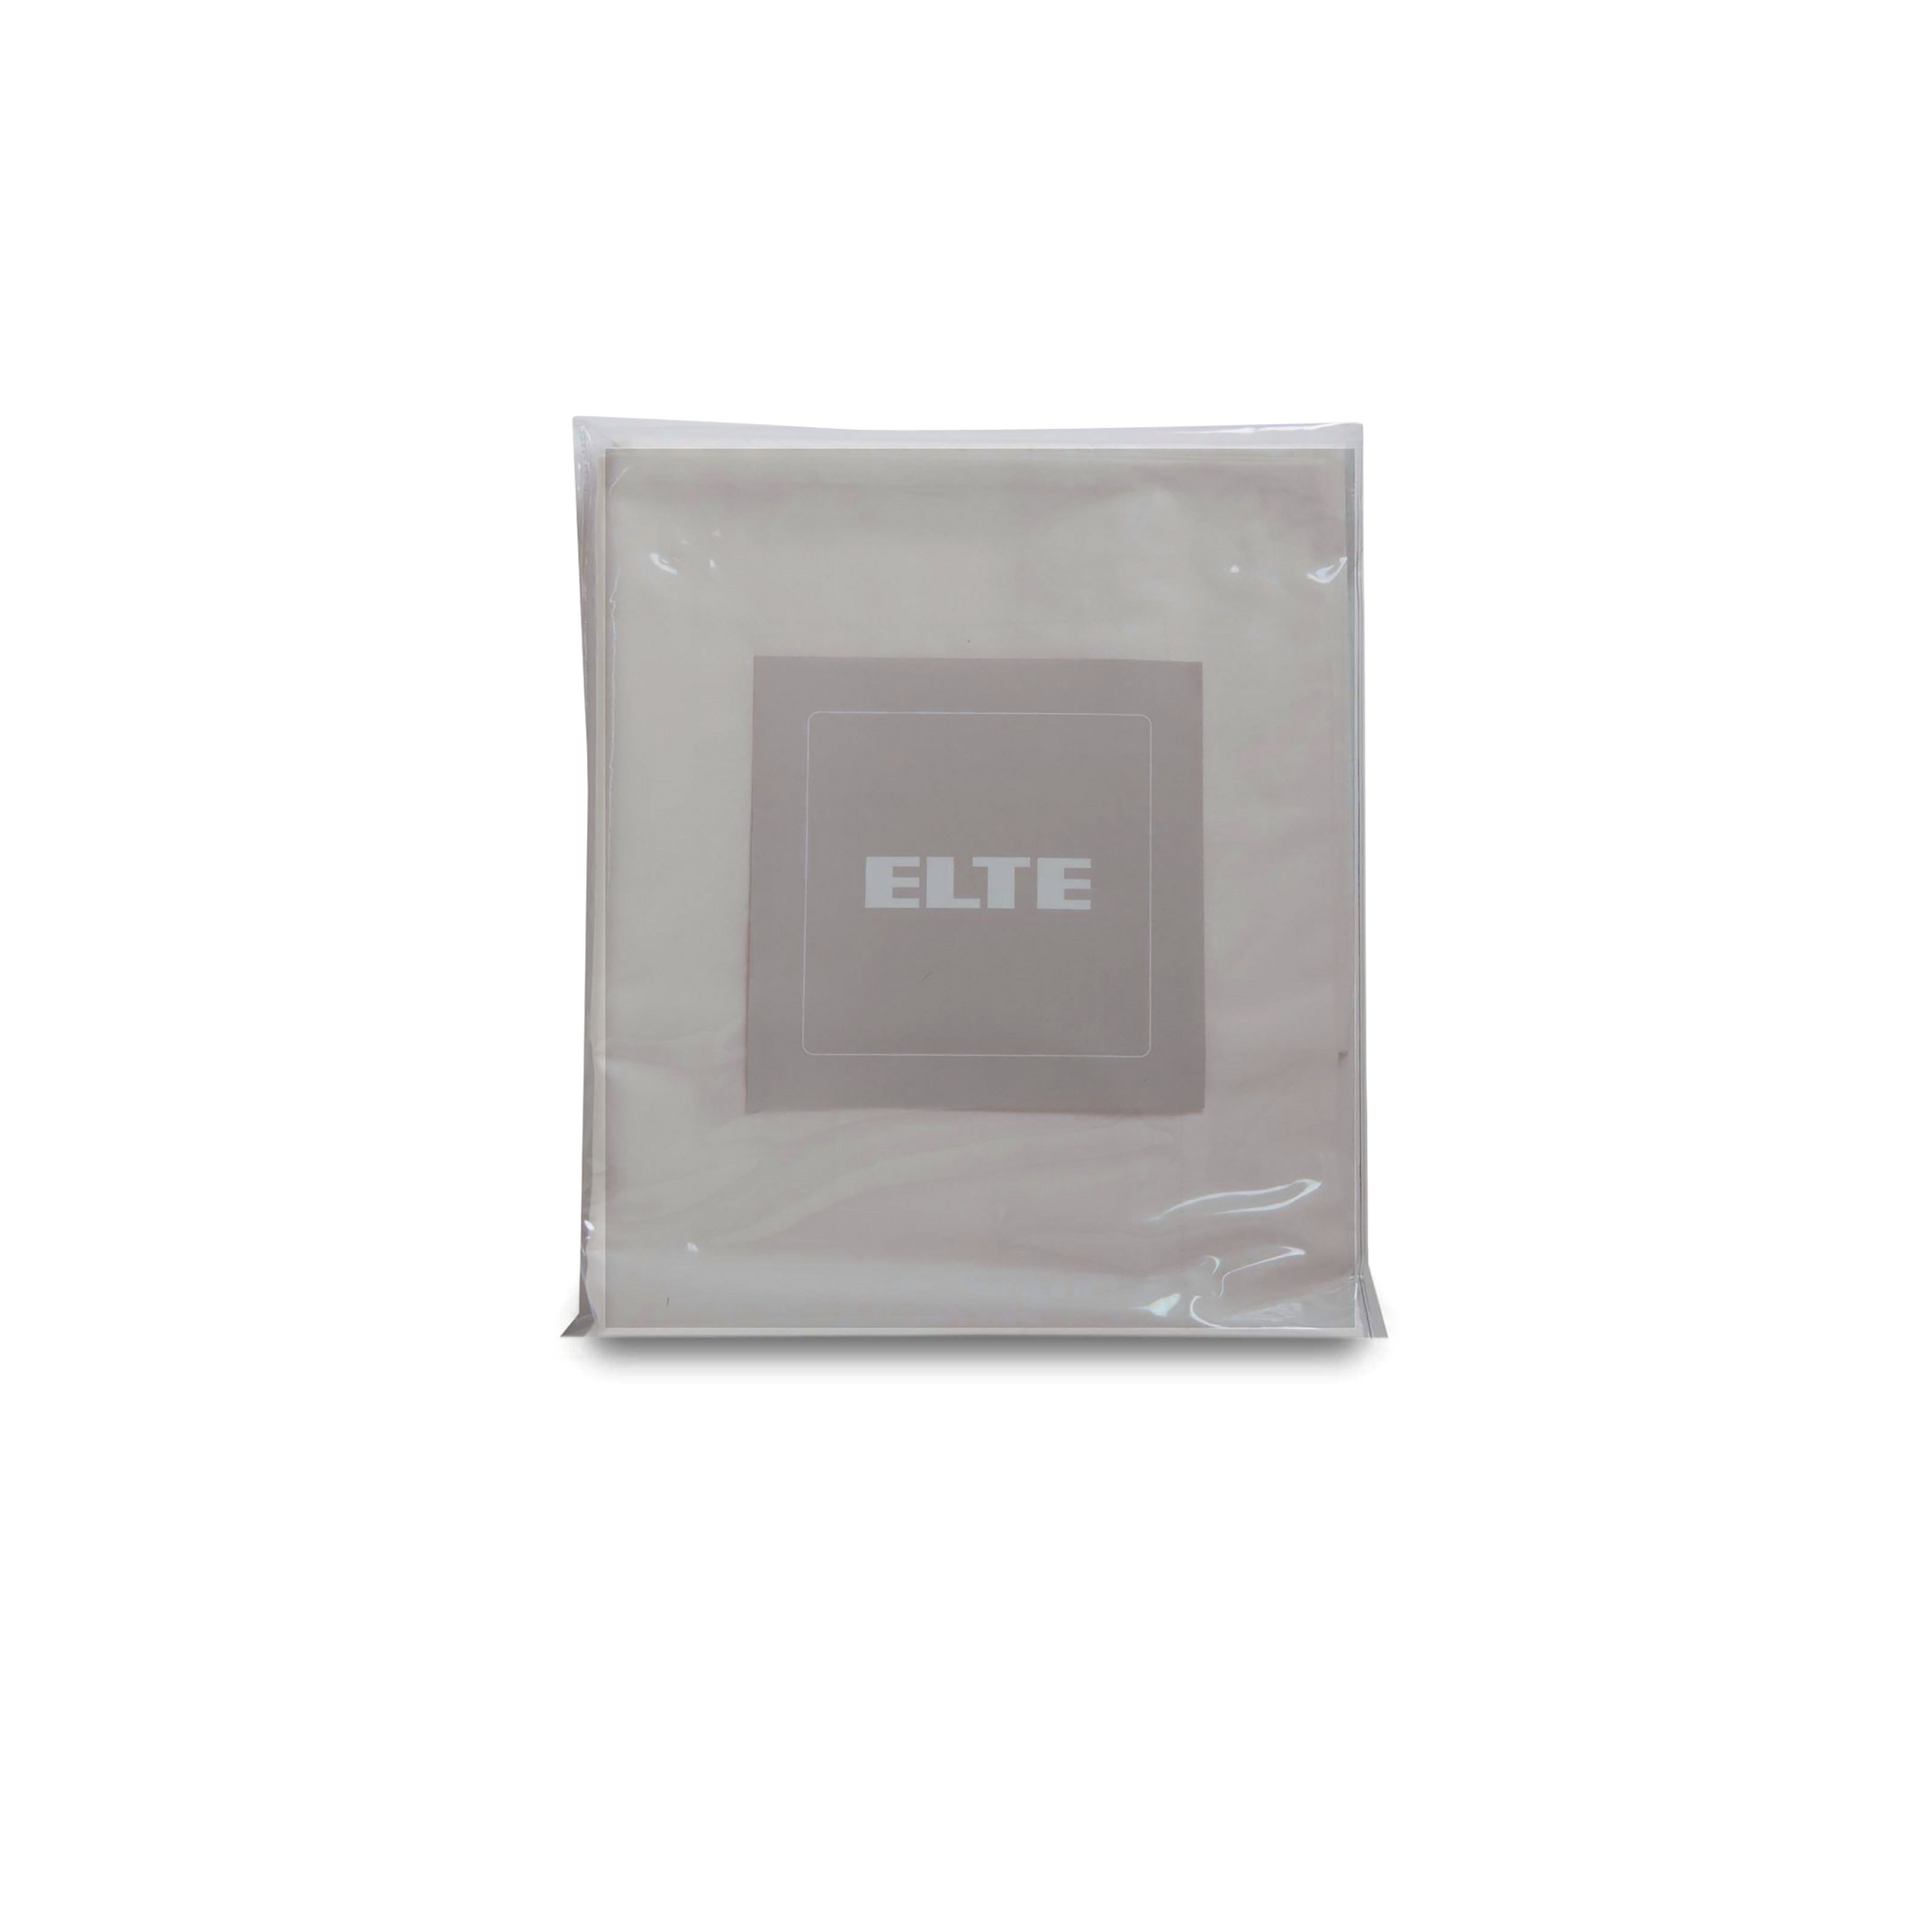 Produced in Italy exclusively for Elte, these Sateen Shams are made in Italy from 100% Egyptian cotton, which provides an incredibly soft, silky feel and creates a slight sheen on 